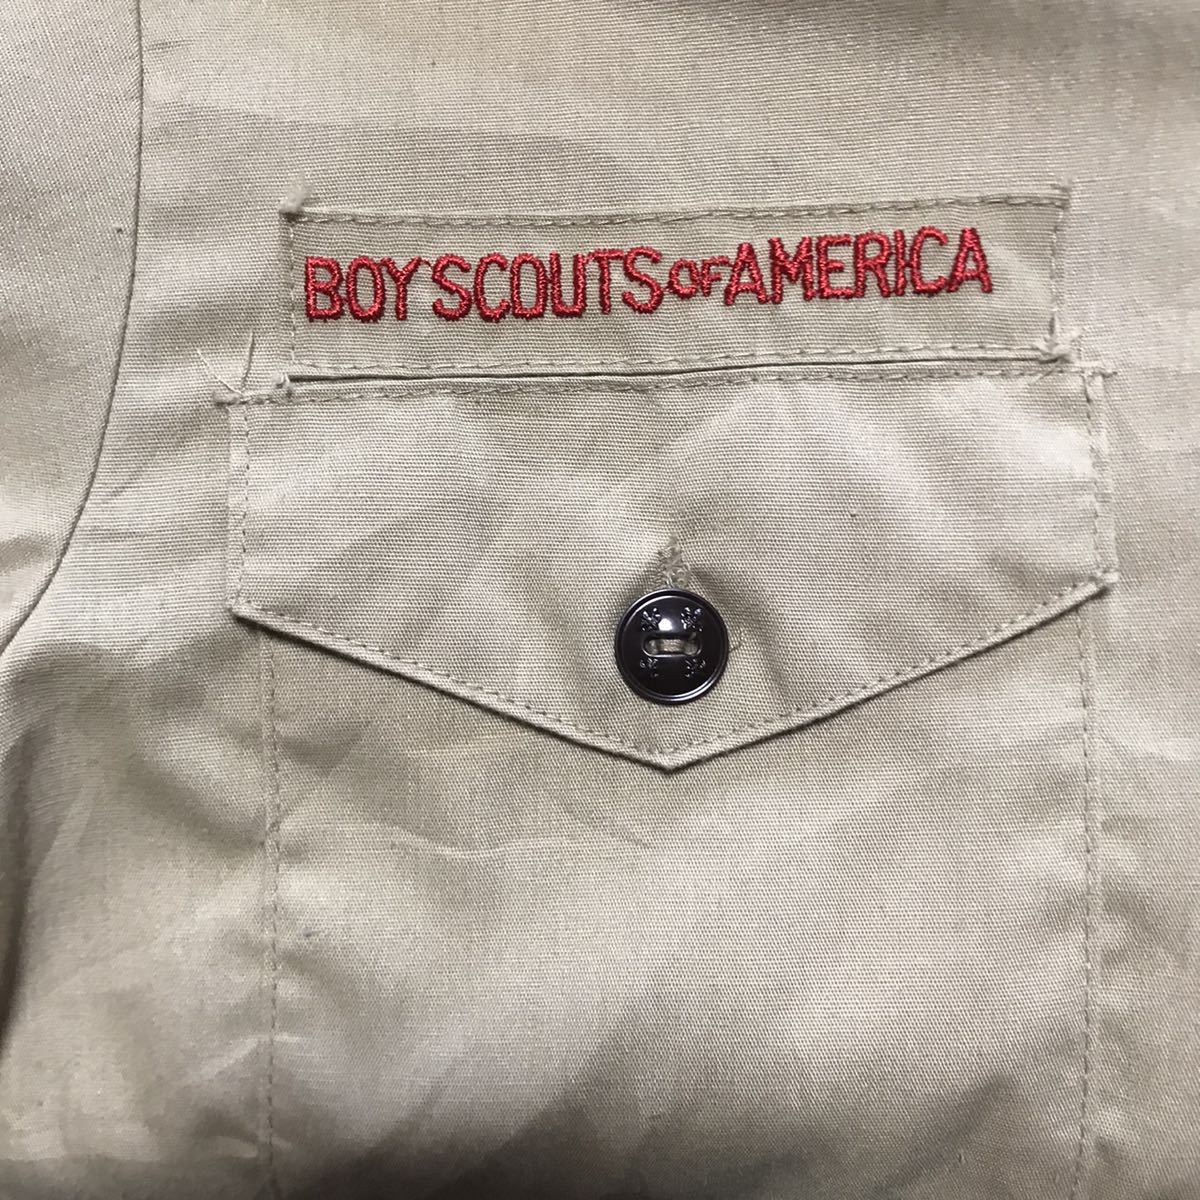 70s USED BOY SCOUT SHIRT X- SMALL 中古 70's ビンテージ ボーイスカウト シャツ MADE IN USA ボーイズ 14サイズ アメリカ製実物 送料無料